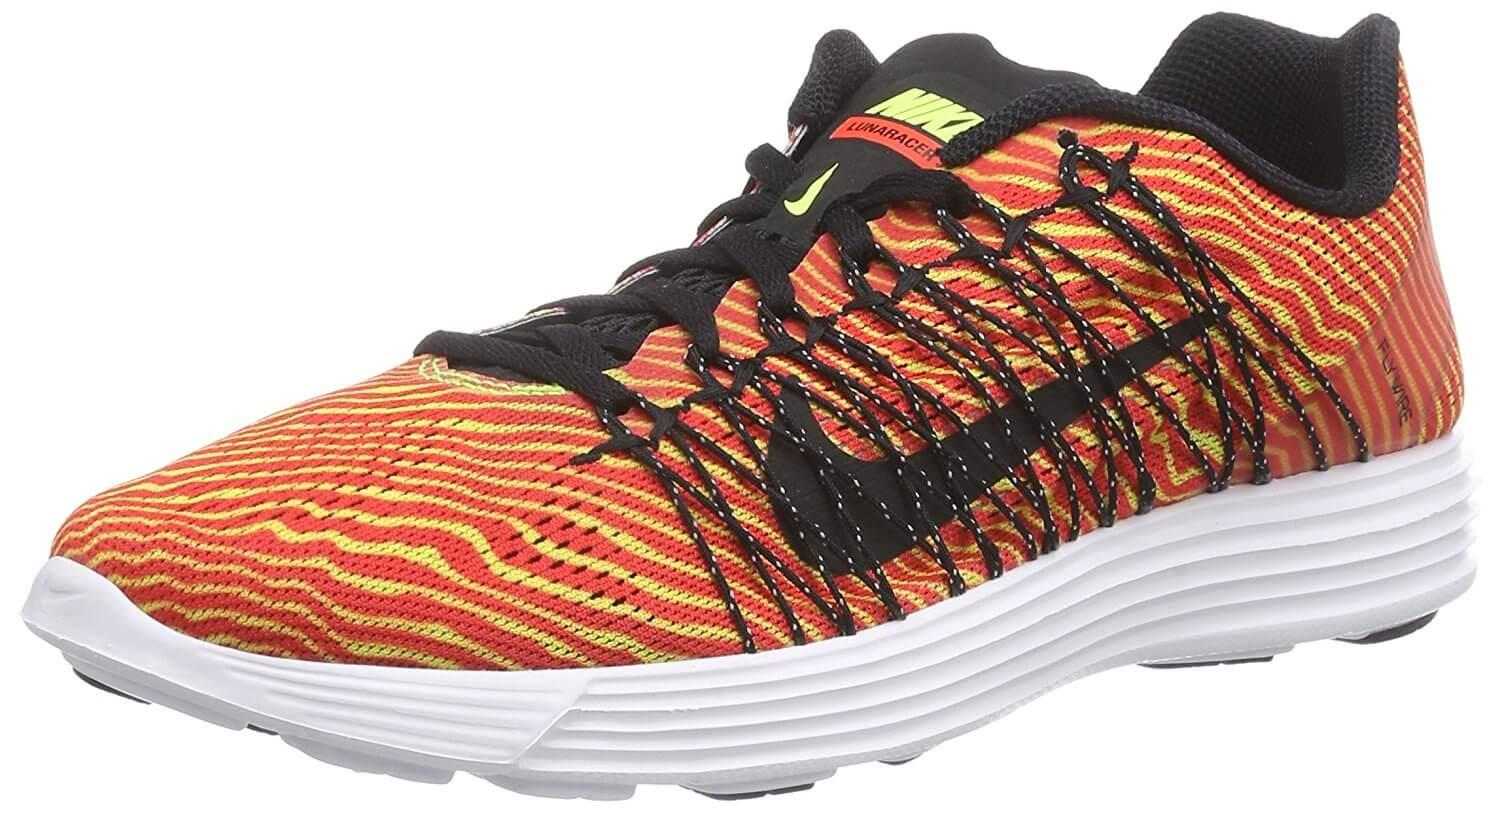 the Nike LunaRacer 3 is a stylish and comfortable road racing shoe